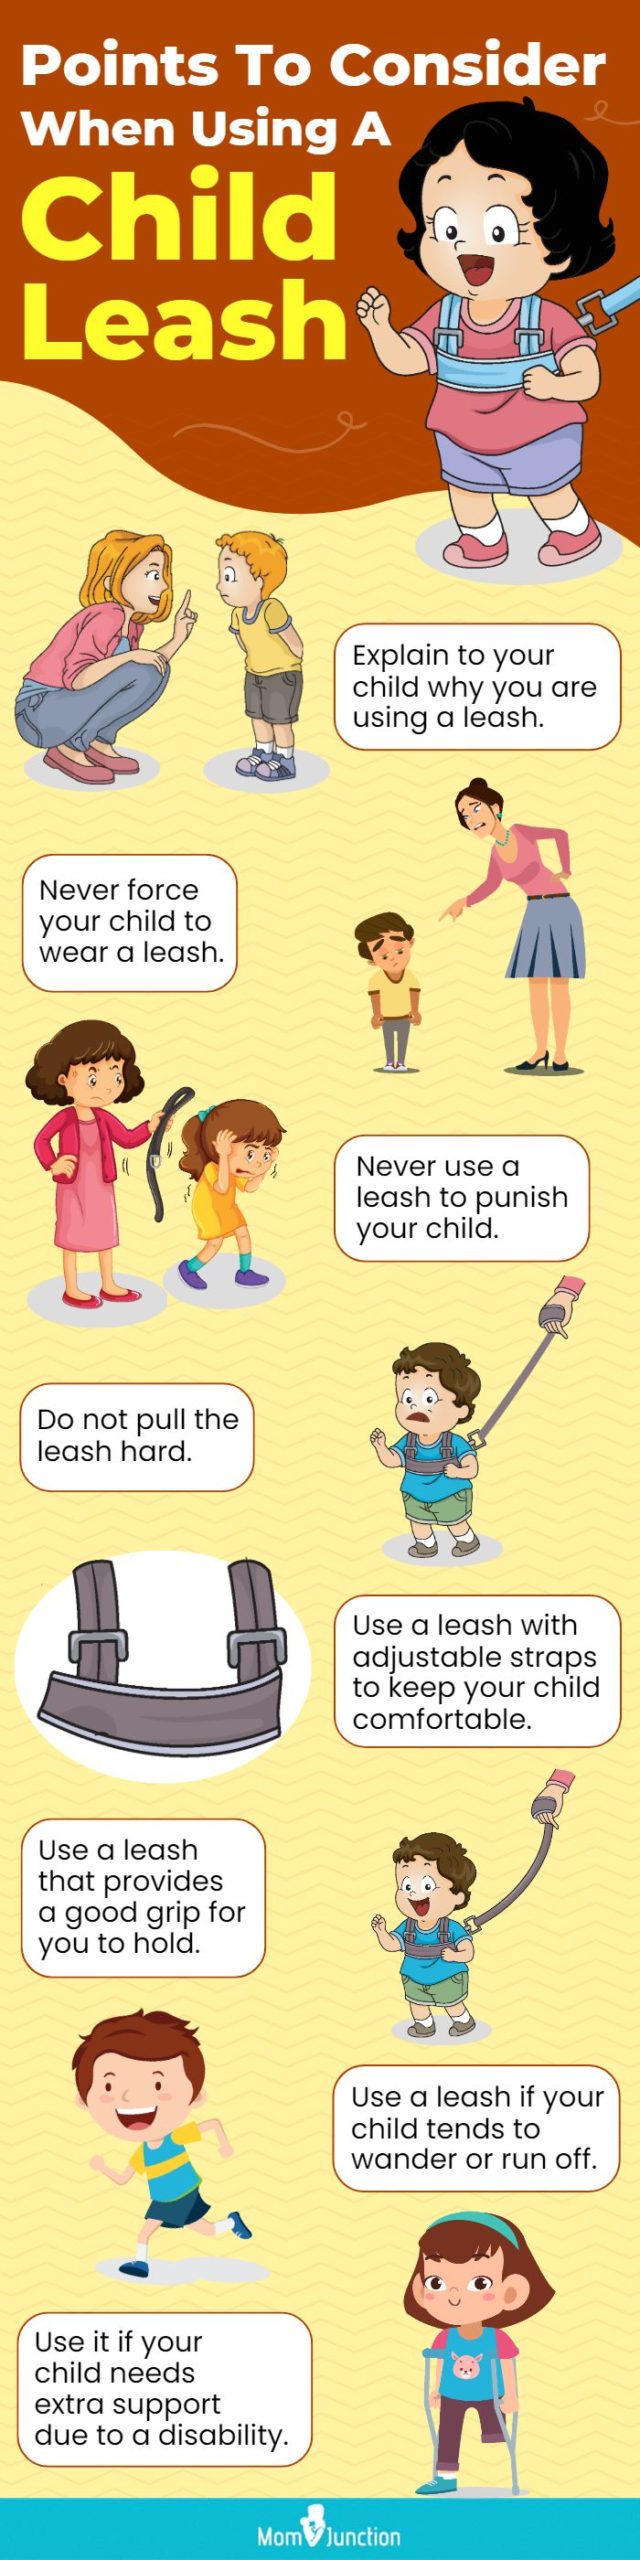 Points To Consider When Using A Child Leash (infographic)